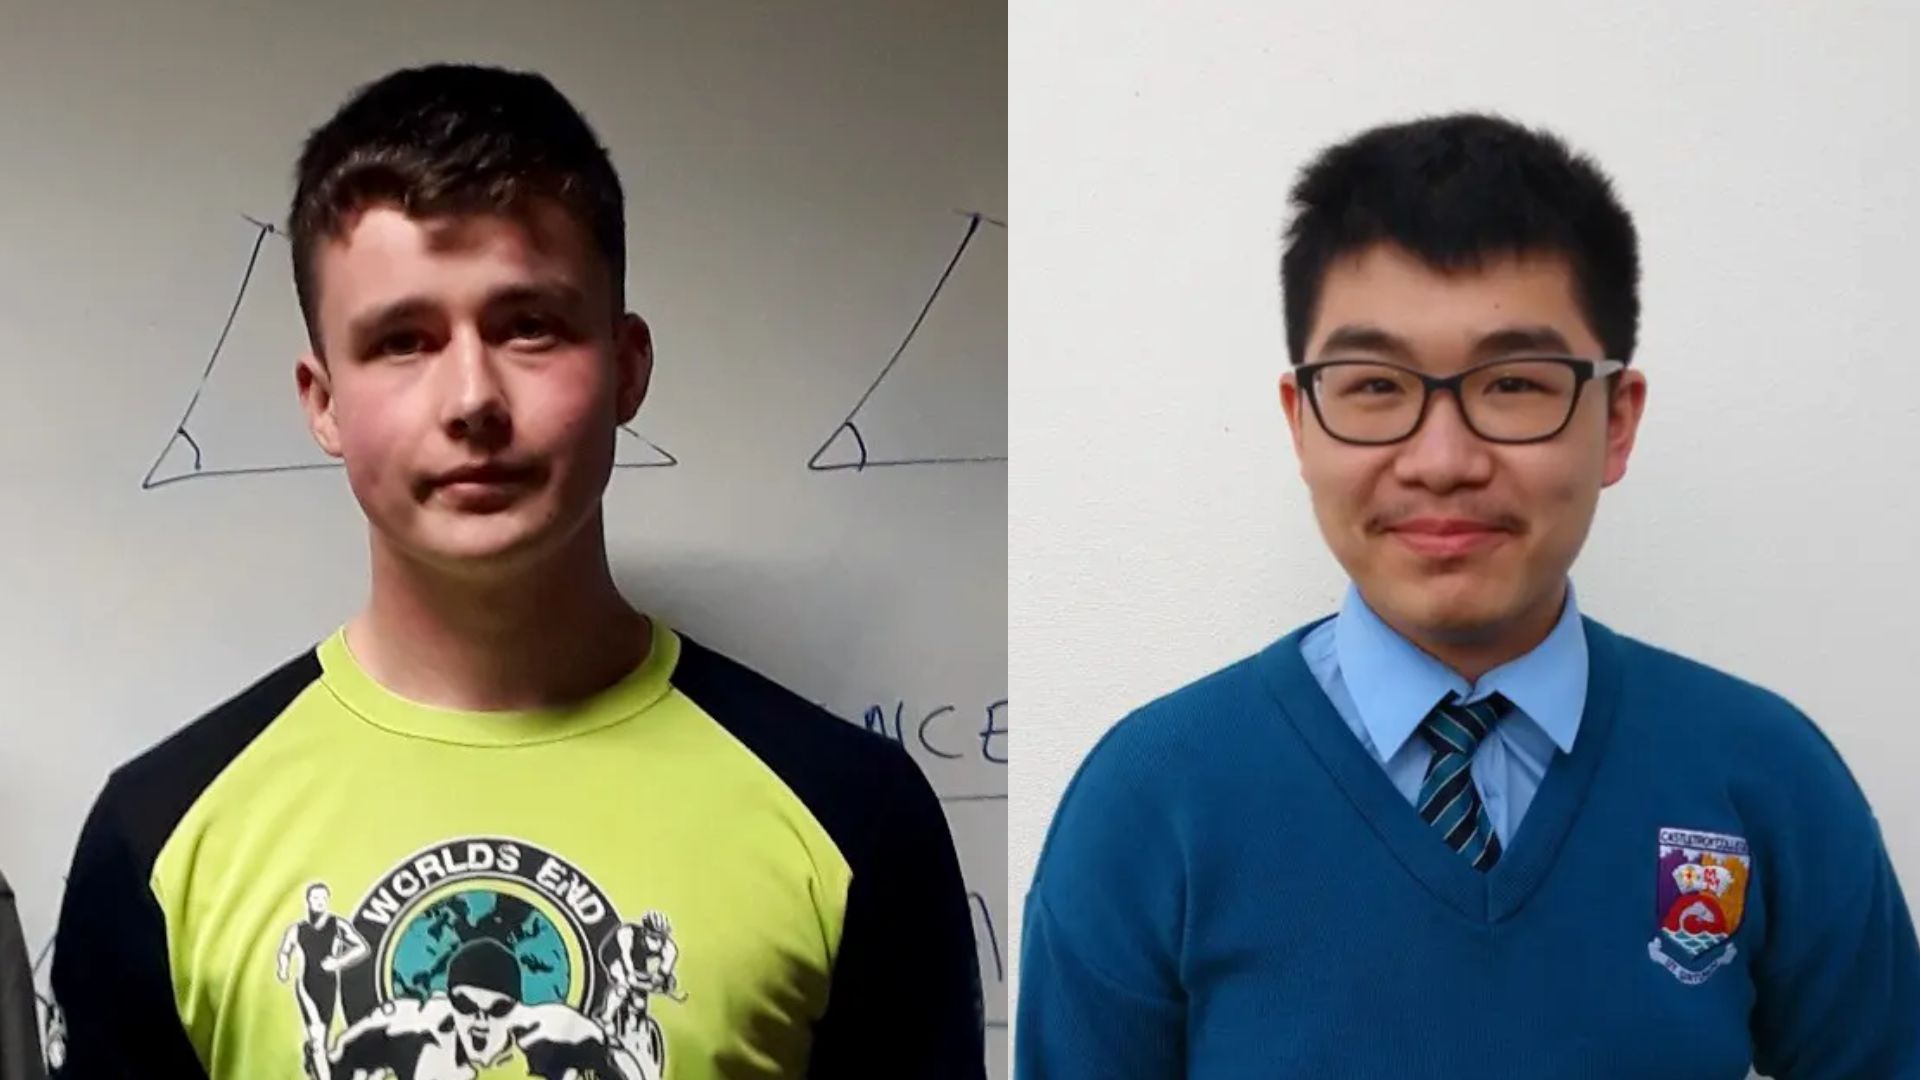 International Mathematics Olympiad - Castletroy students Rory Moore and James Chen are set to go to Oslo in July for an International Mathematical Olympiad.